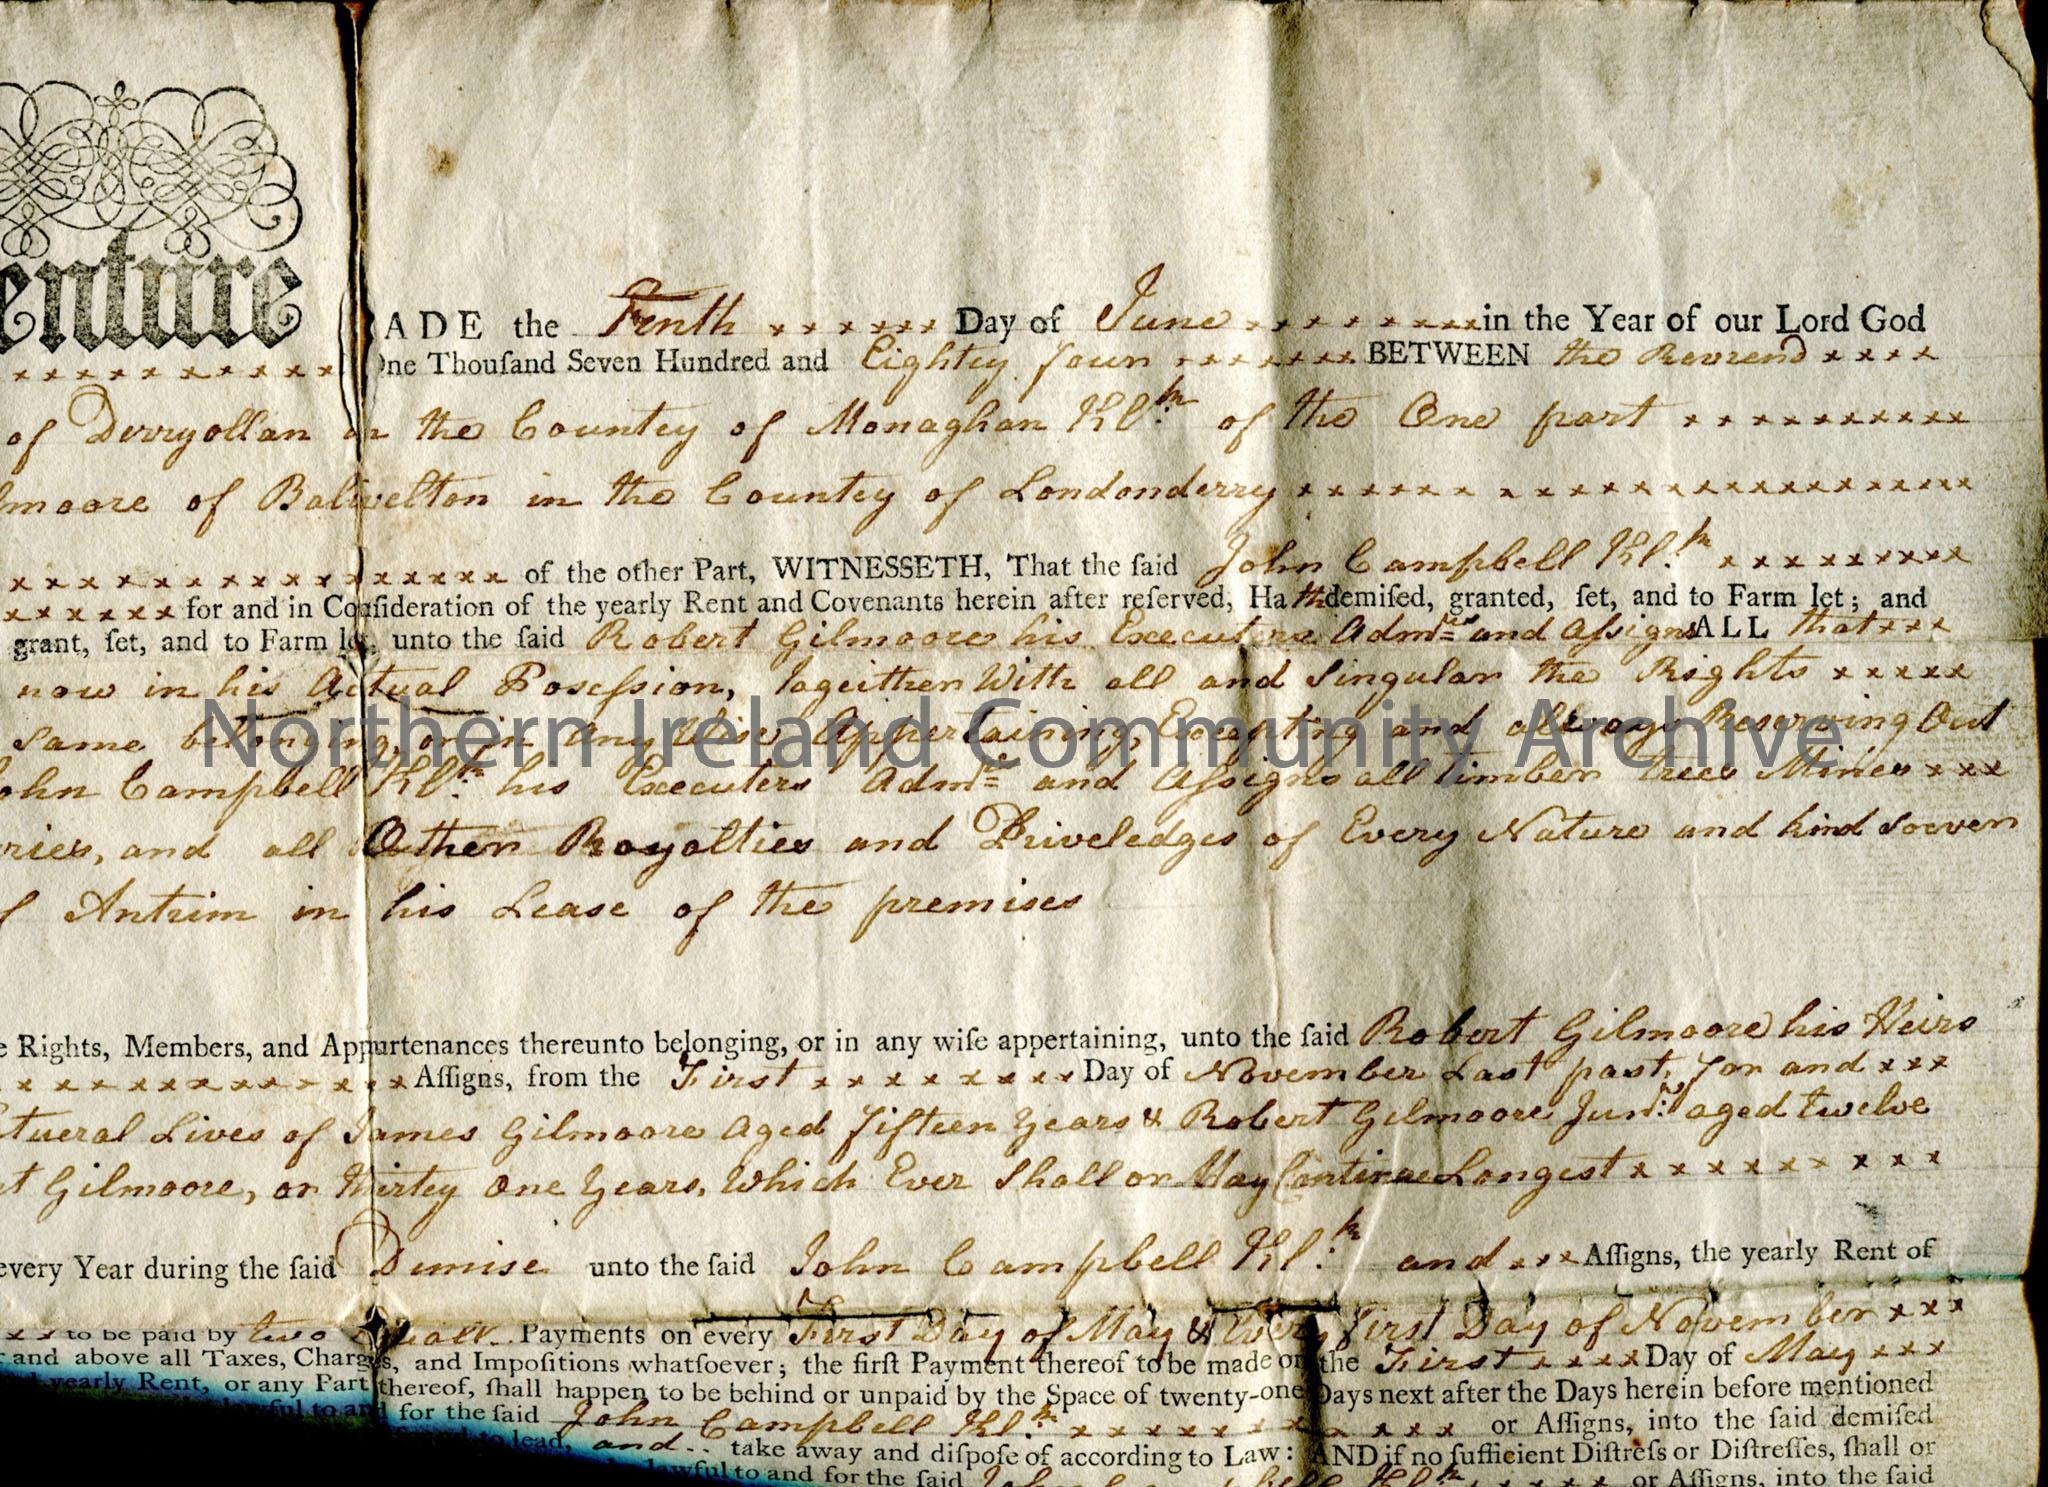 18th century indenture for land rental agreement, with conditions of lease, for land in Ballyvelton – img115b